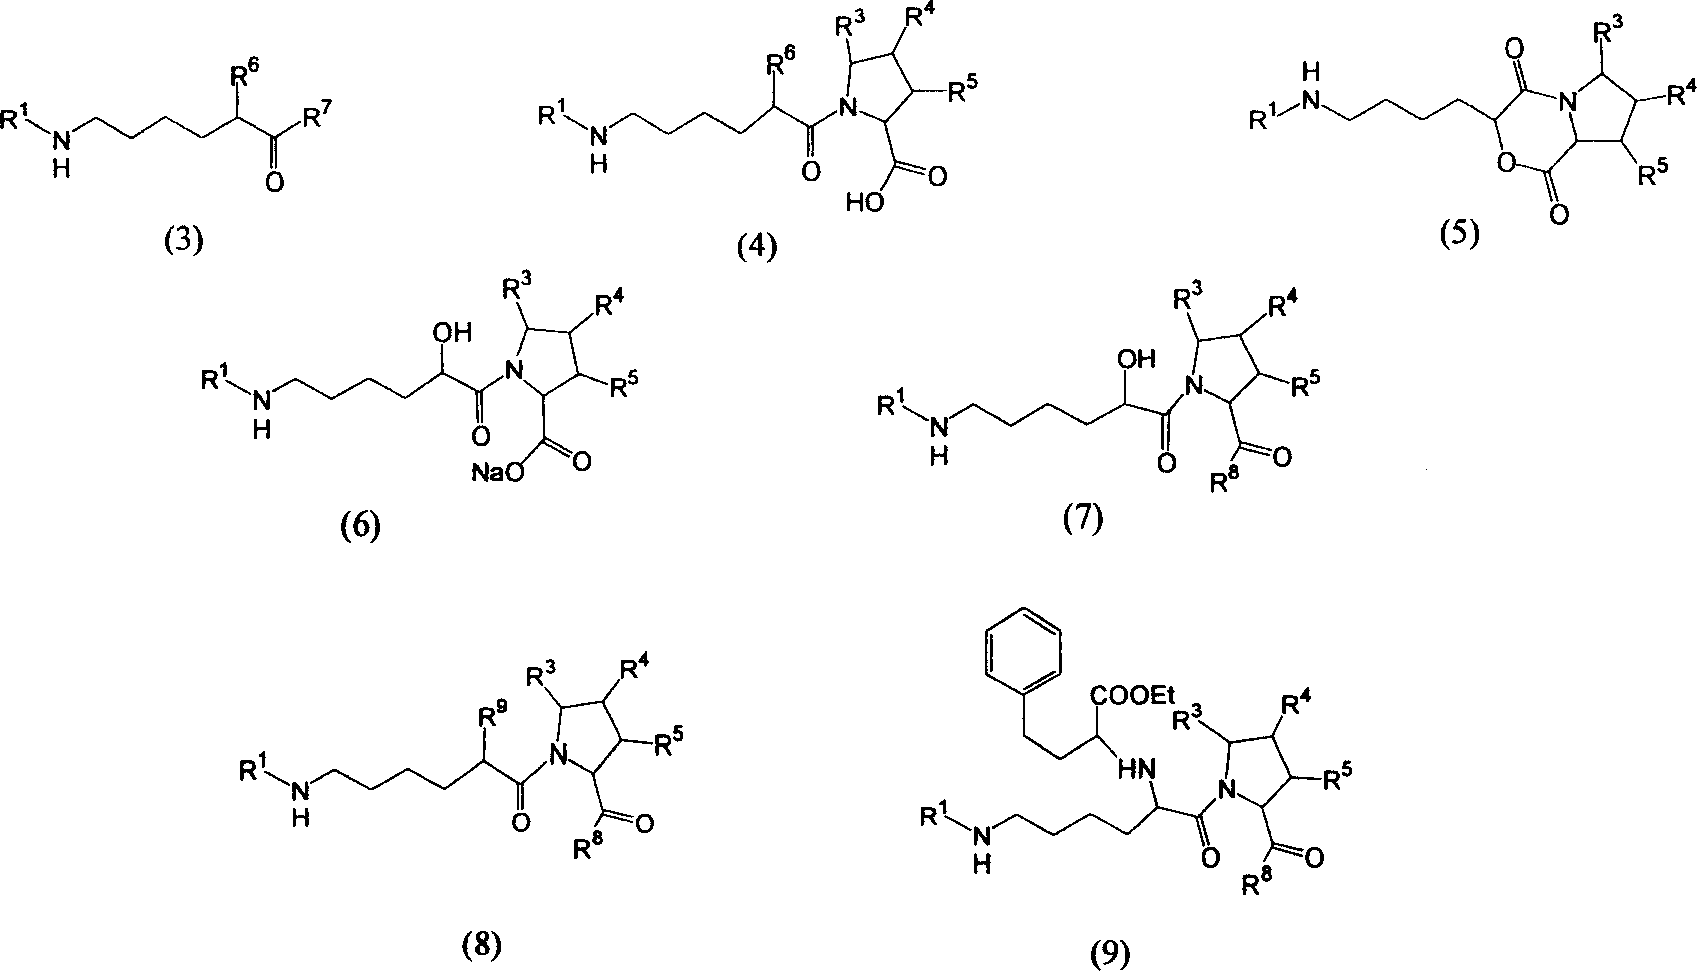 Precursor of Lisinopril compound and synthetic method